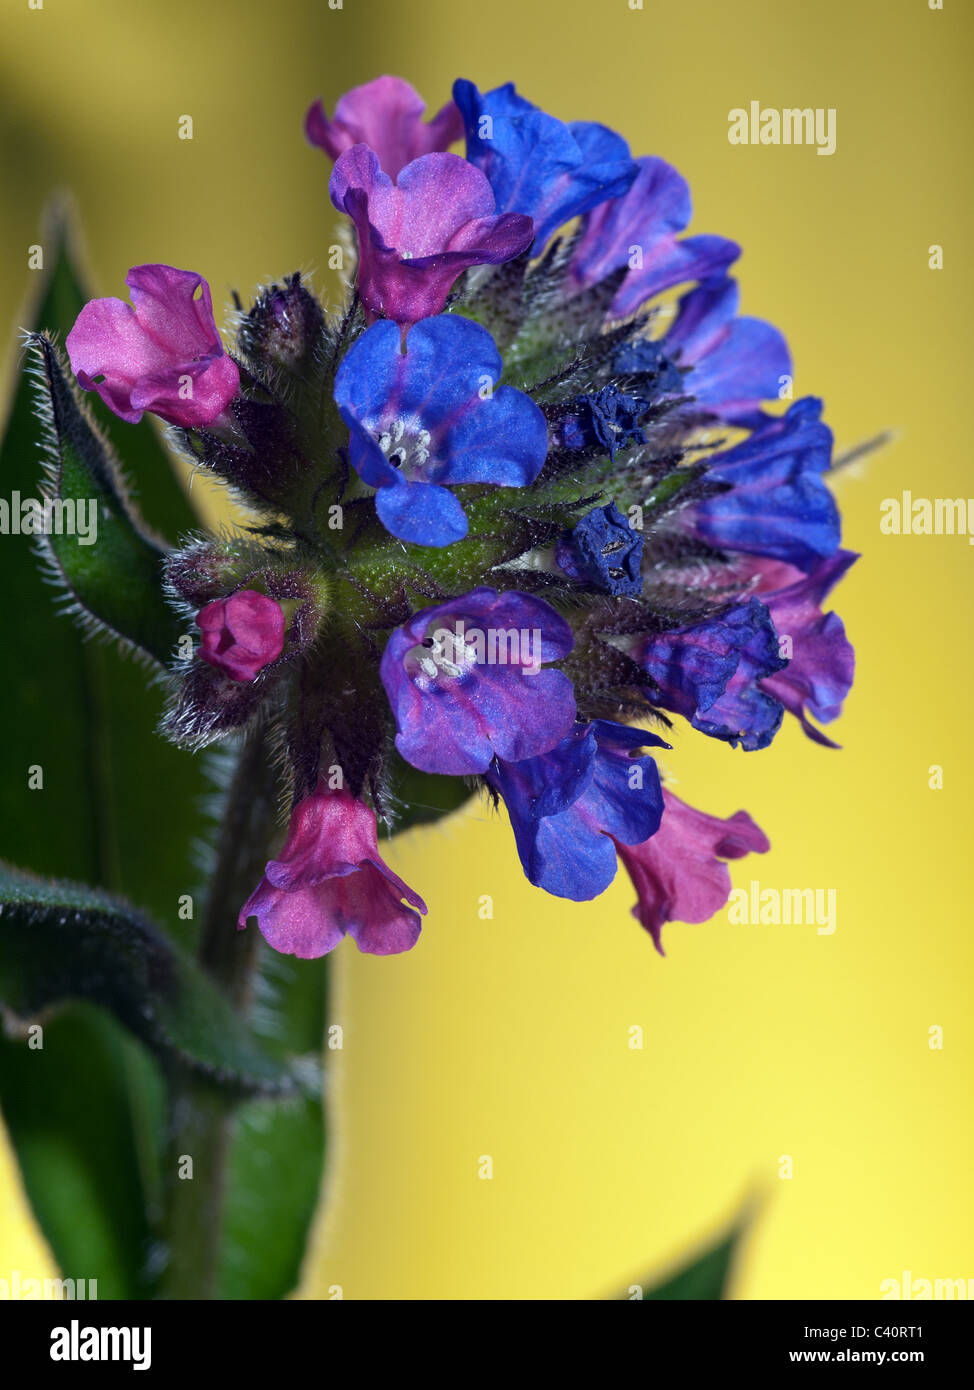 Pulmonaria longifolia, lungwort, portrait of blue and red flowers with nice out of focus background. Stock Photo